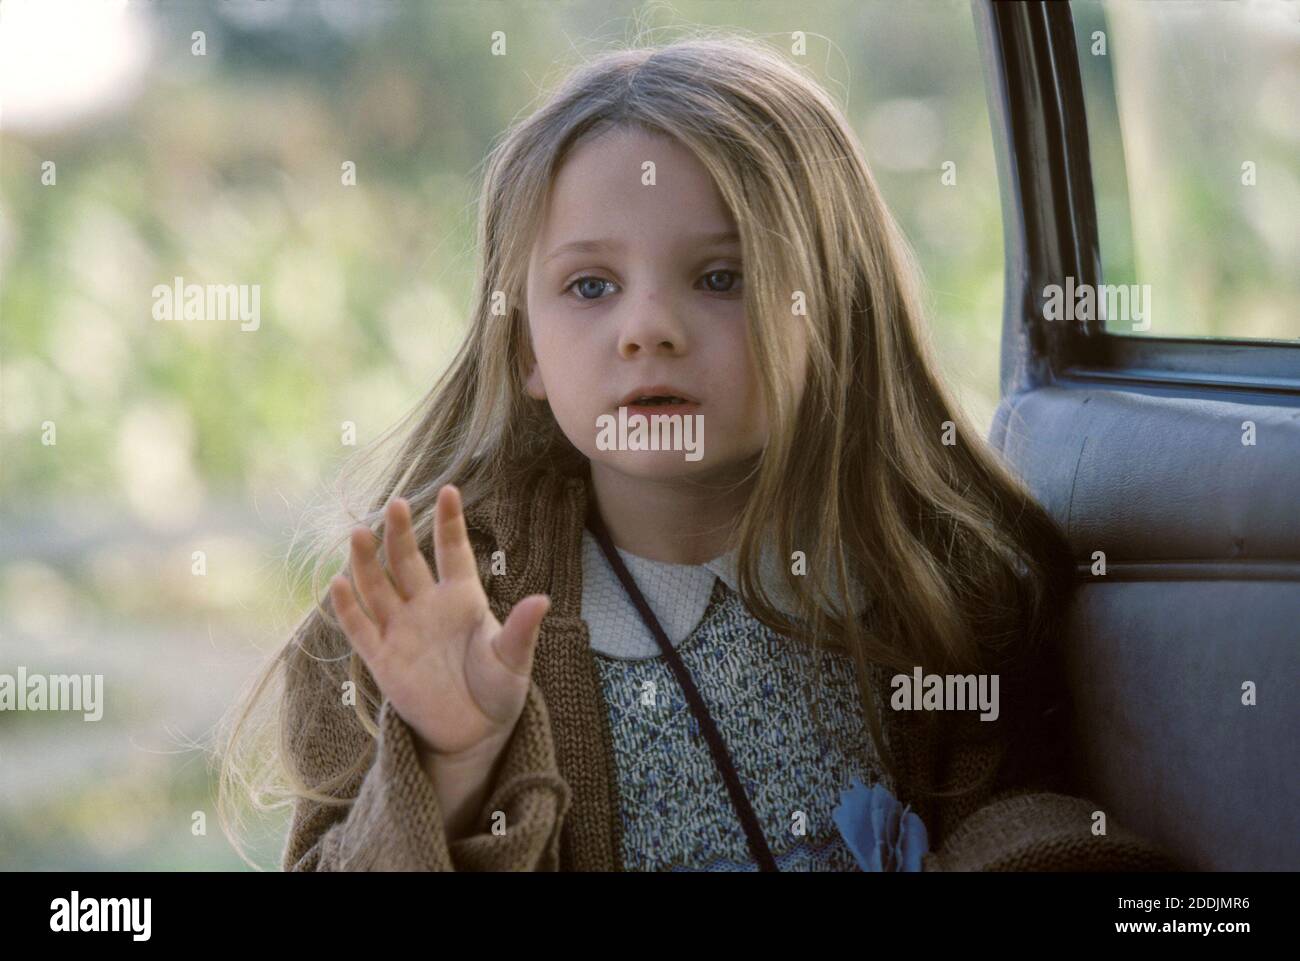 Abigail Breslin, 'Signs' (2002)  Photo credit: Touchstone / The Hollywood Archive / File Reference # 34078-0347FSTHA Stock Photo